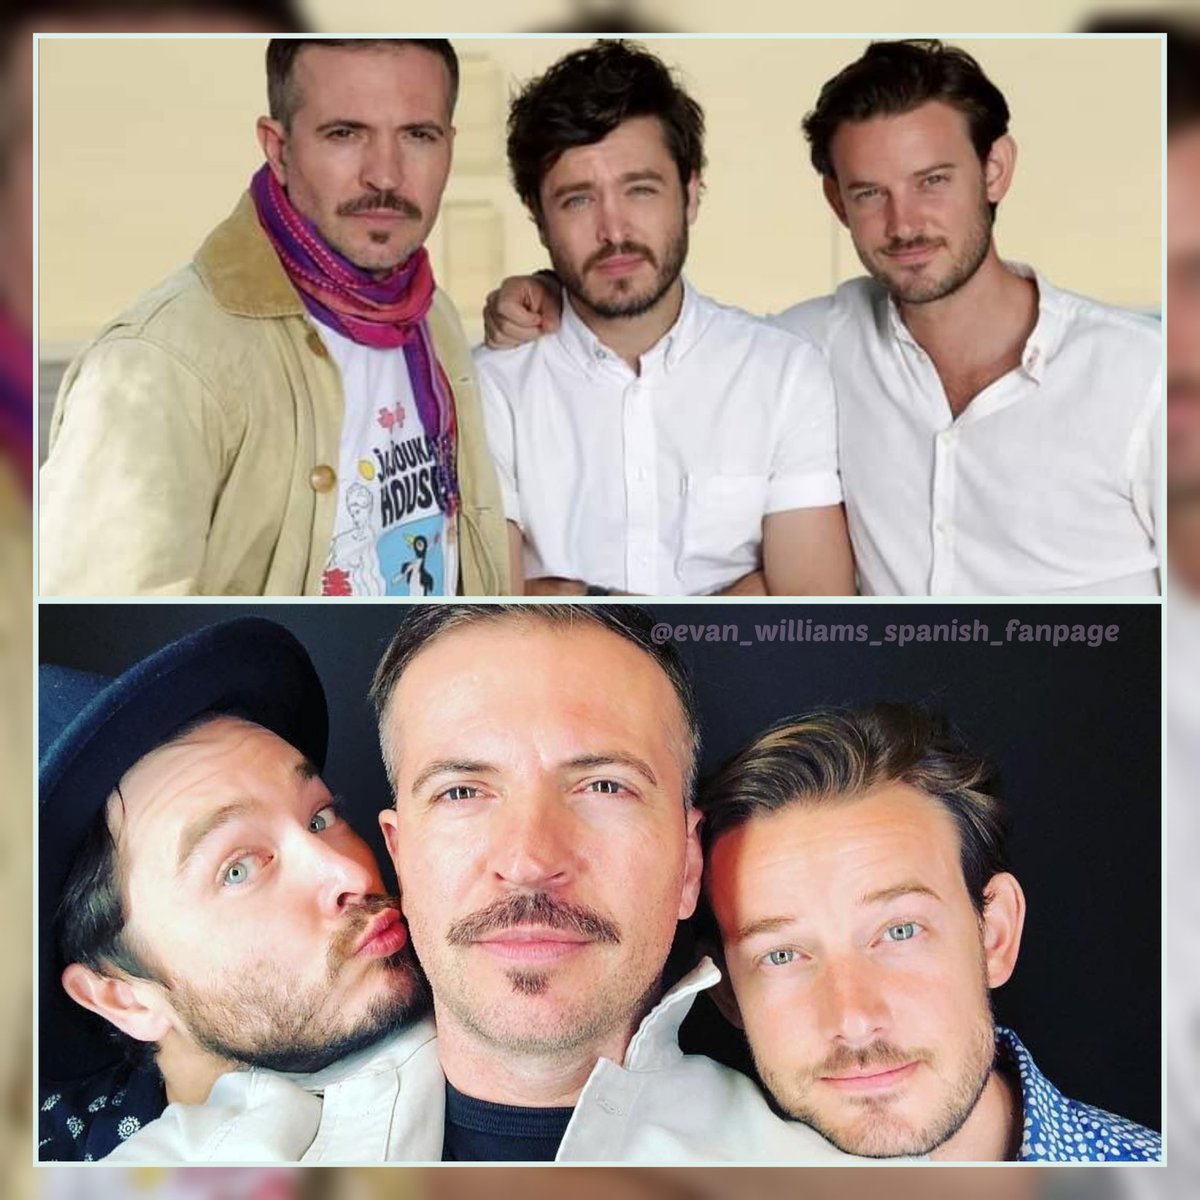 Just 50 days to go 🗓

LET'S DO IT.

Happy #Manfriday and #Fabienfriday everyone. Have a wonderful day and a fantastic weekend my dear #Versaillesfam. Hope to see U soon 😊  

Sending good vibes and hugs 💞💞

#EvanmWilliams
#AlexVlahos
#TyghRunyan 
#RoyalCon
#Nevastalgia